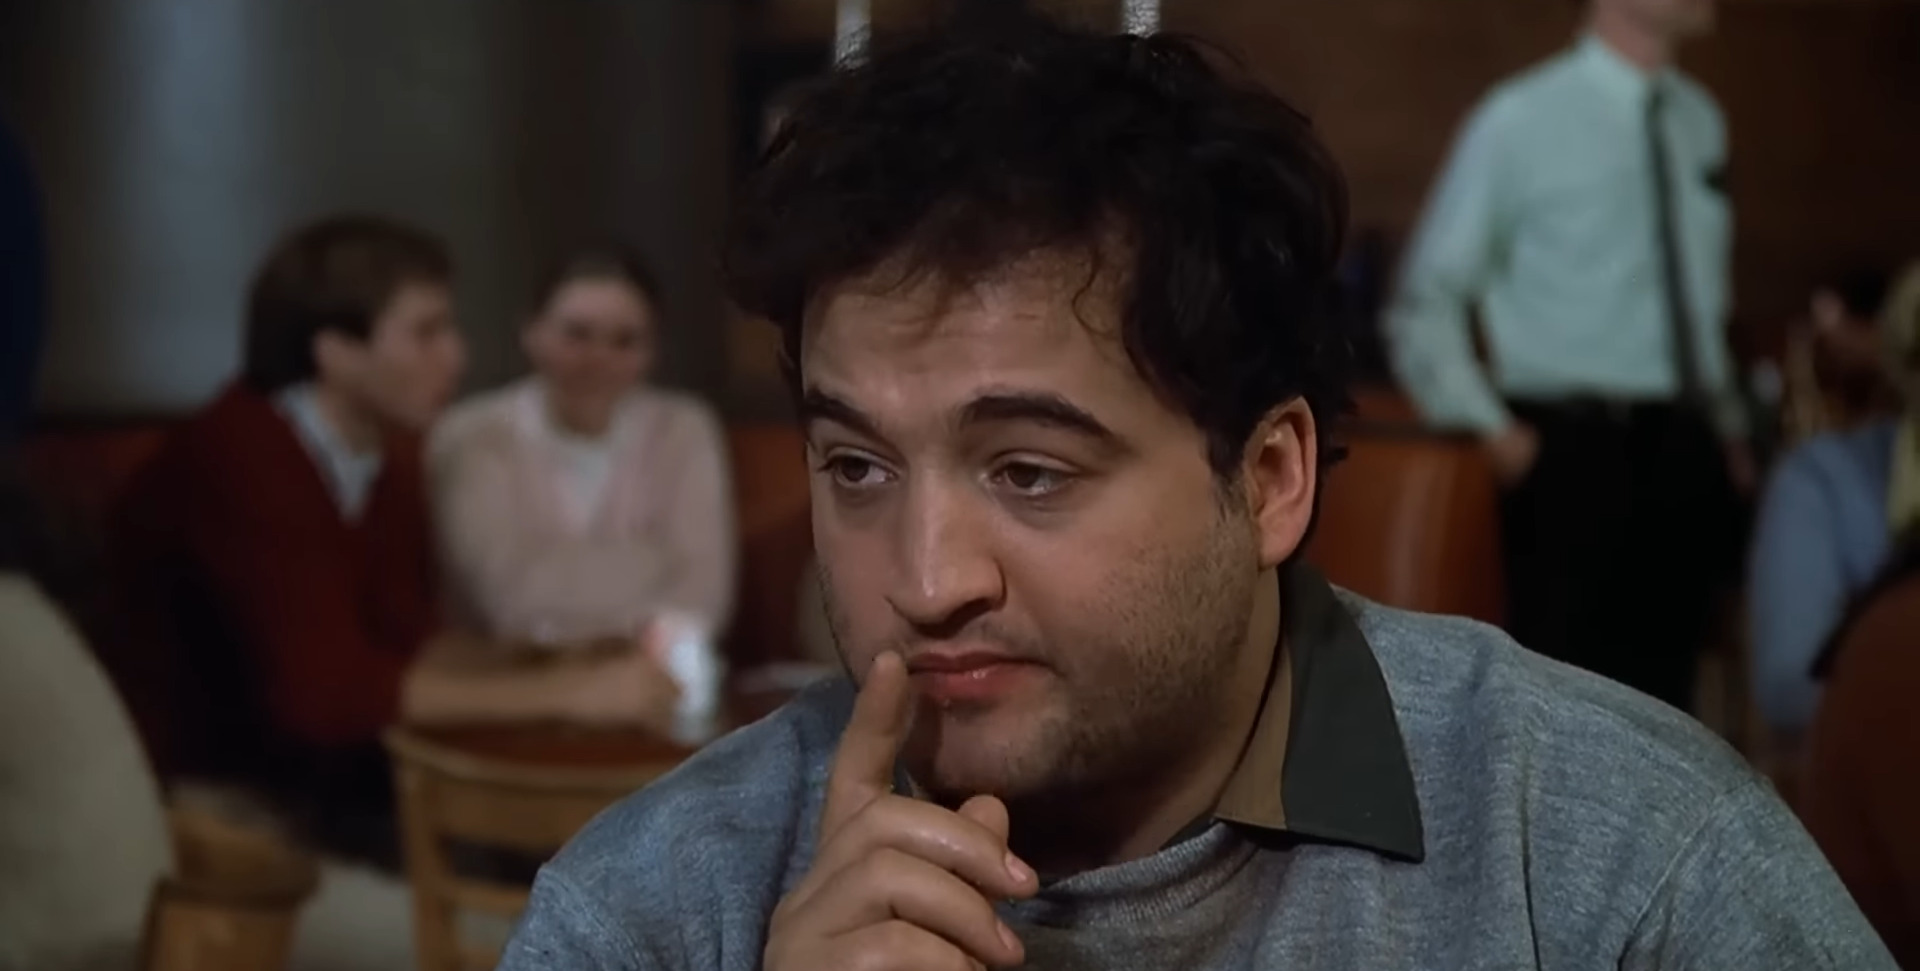 National Lampoon’s Animal House: Where Was the 1978 Movie Filmed?